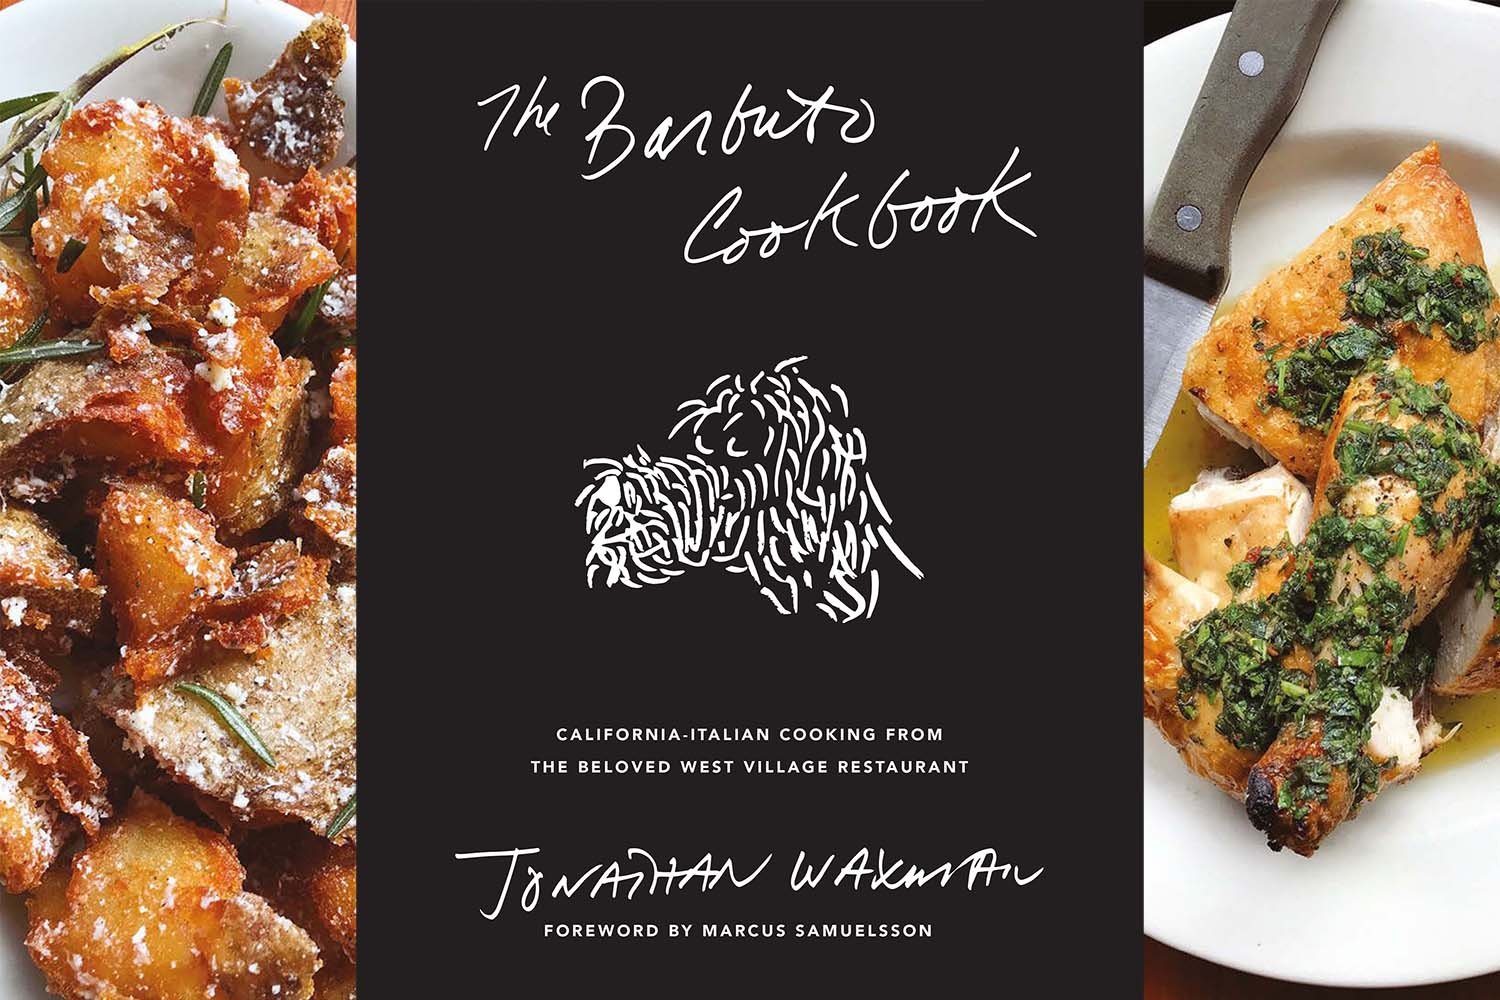 The Barbuto Cookbook: Defining Cal-Ital Cooking 